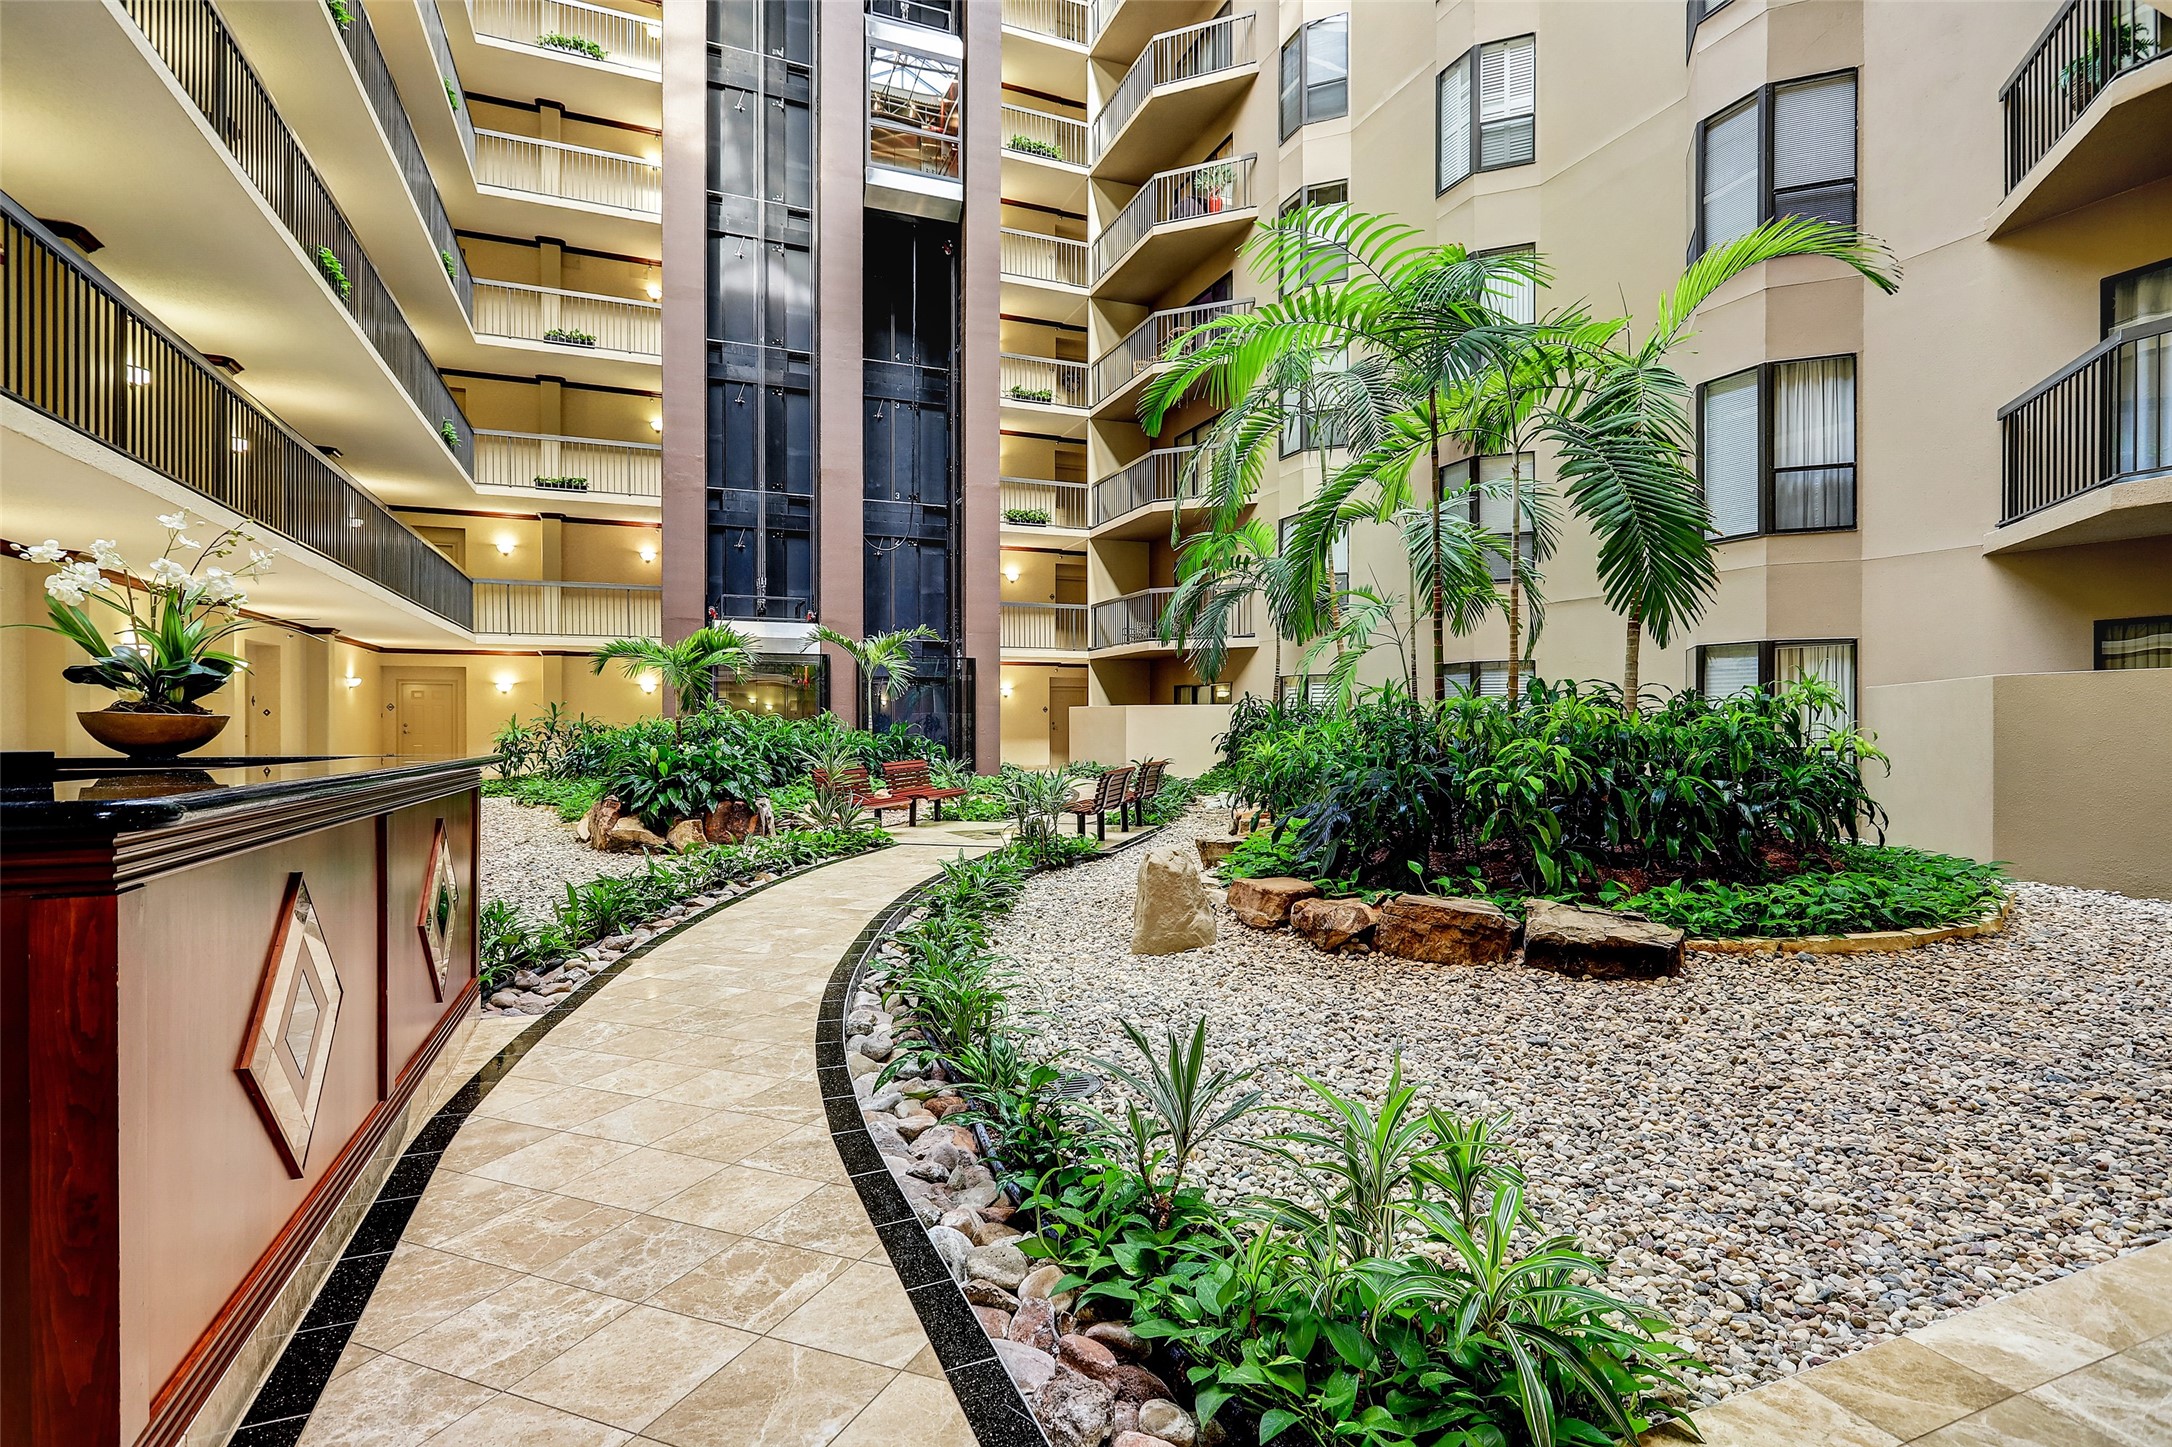 Atrium:  Filled with Alexander palms & tropical landscaping.